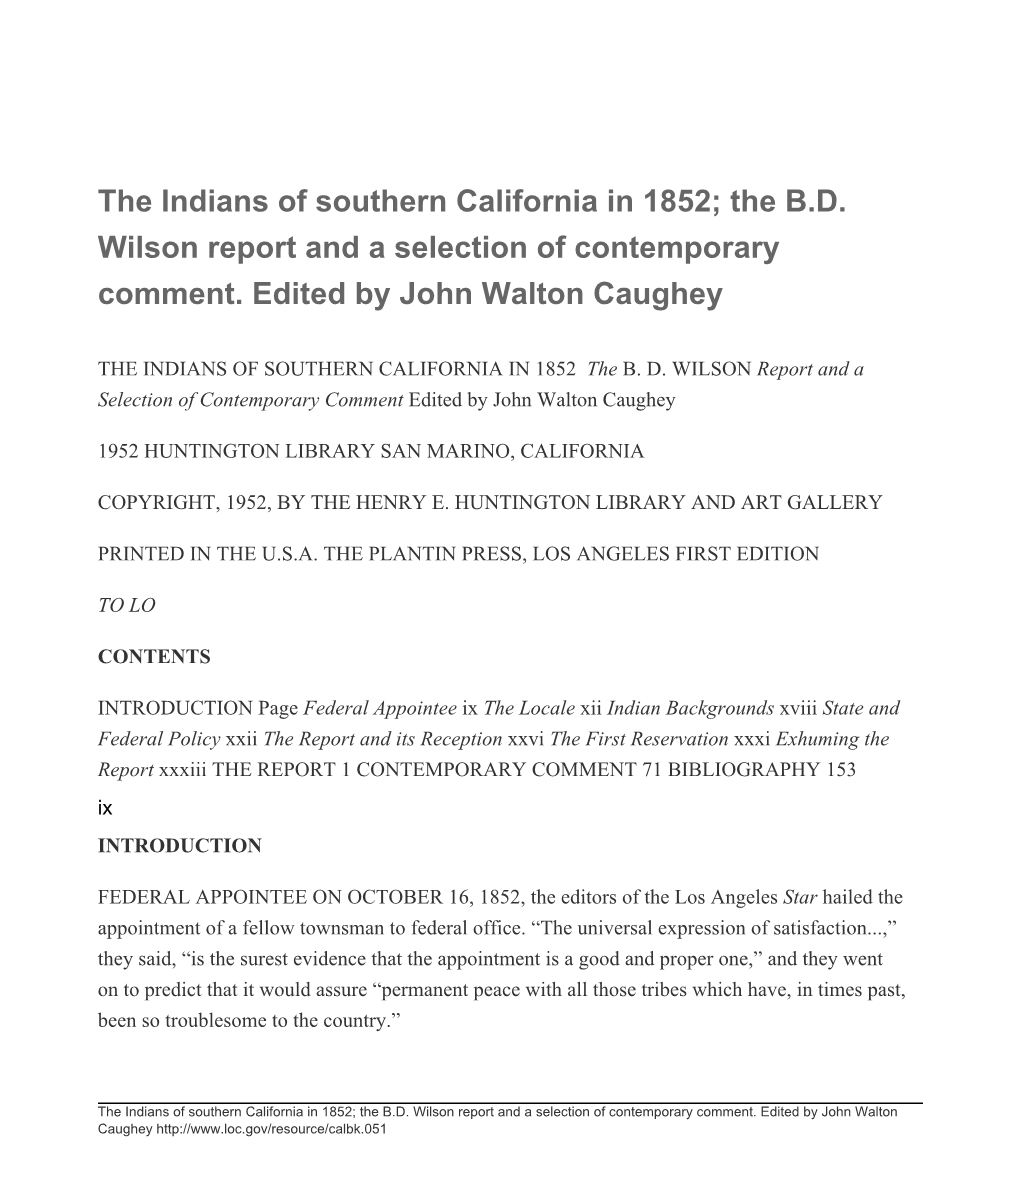 The Indians of Southern California in 1852; the B.D. Wilson Report and a Selection of Contemporary Comment